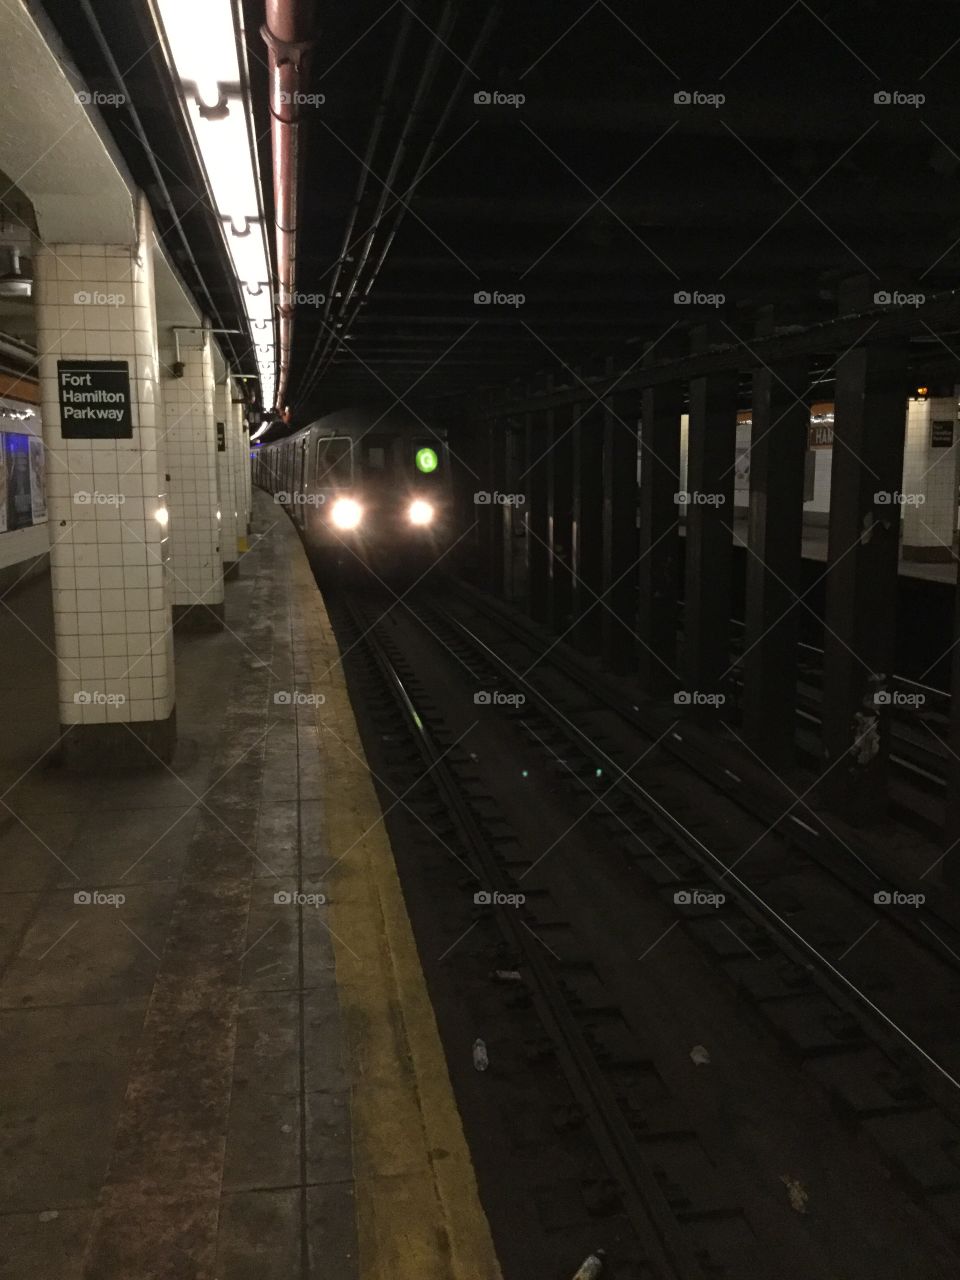 Here comes the G Train.